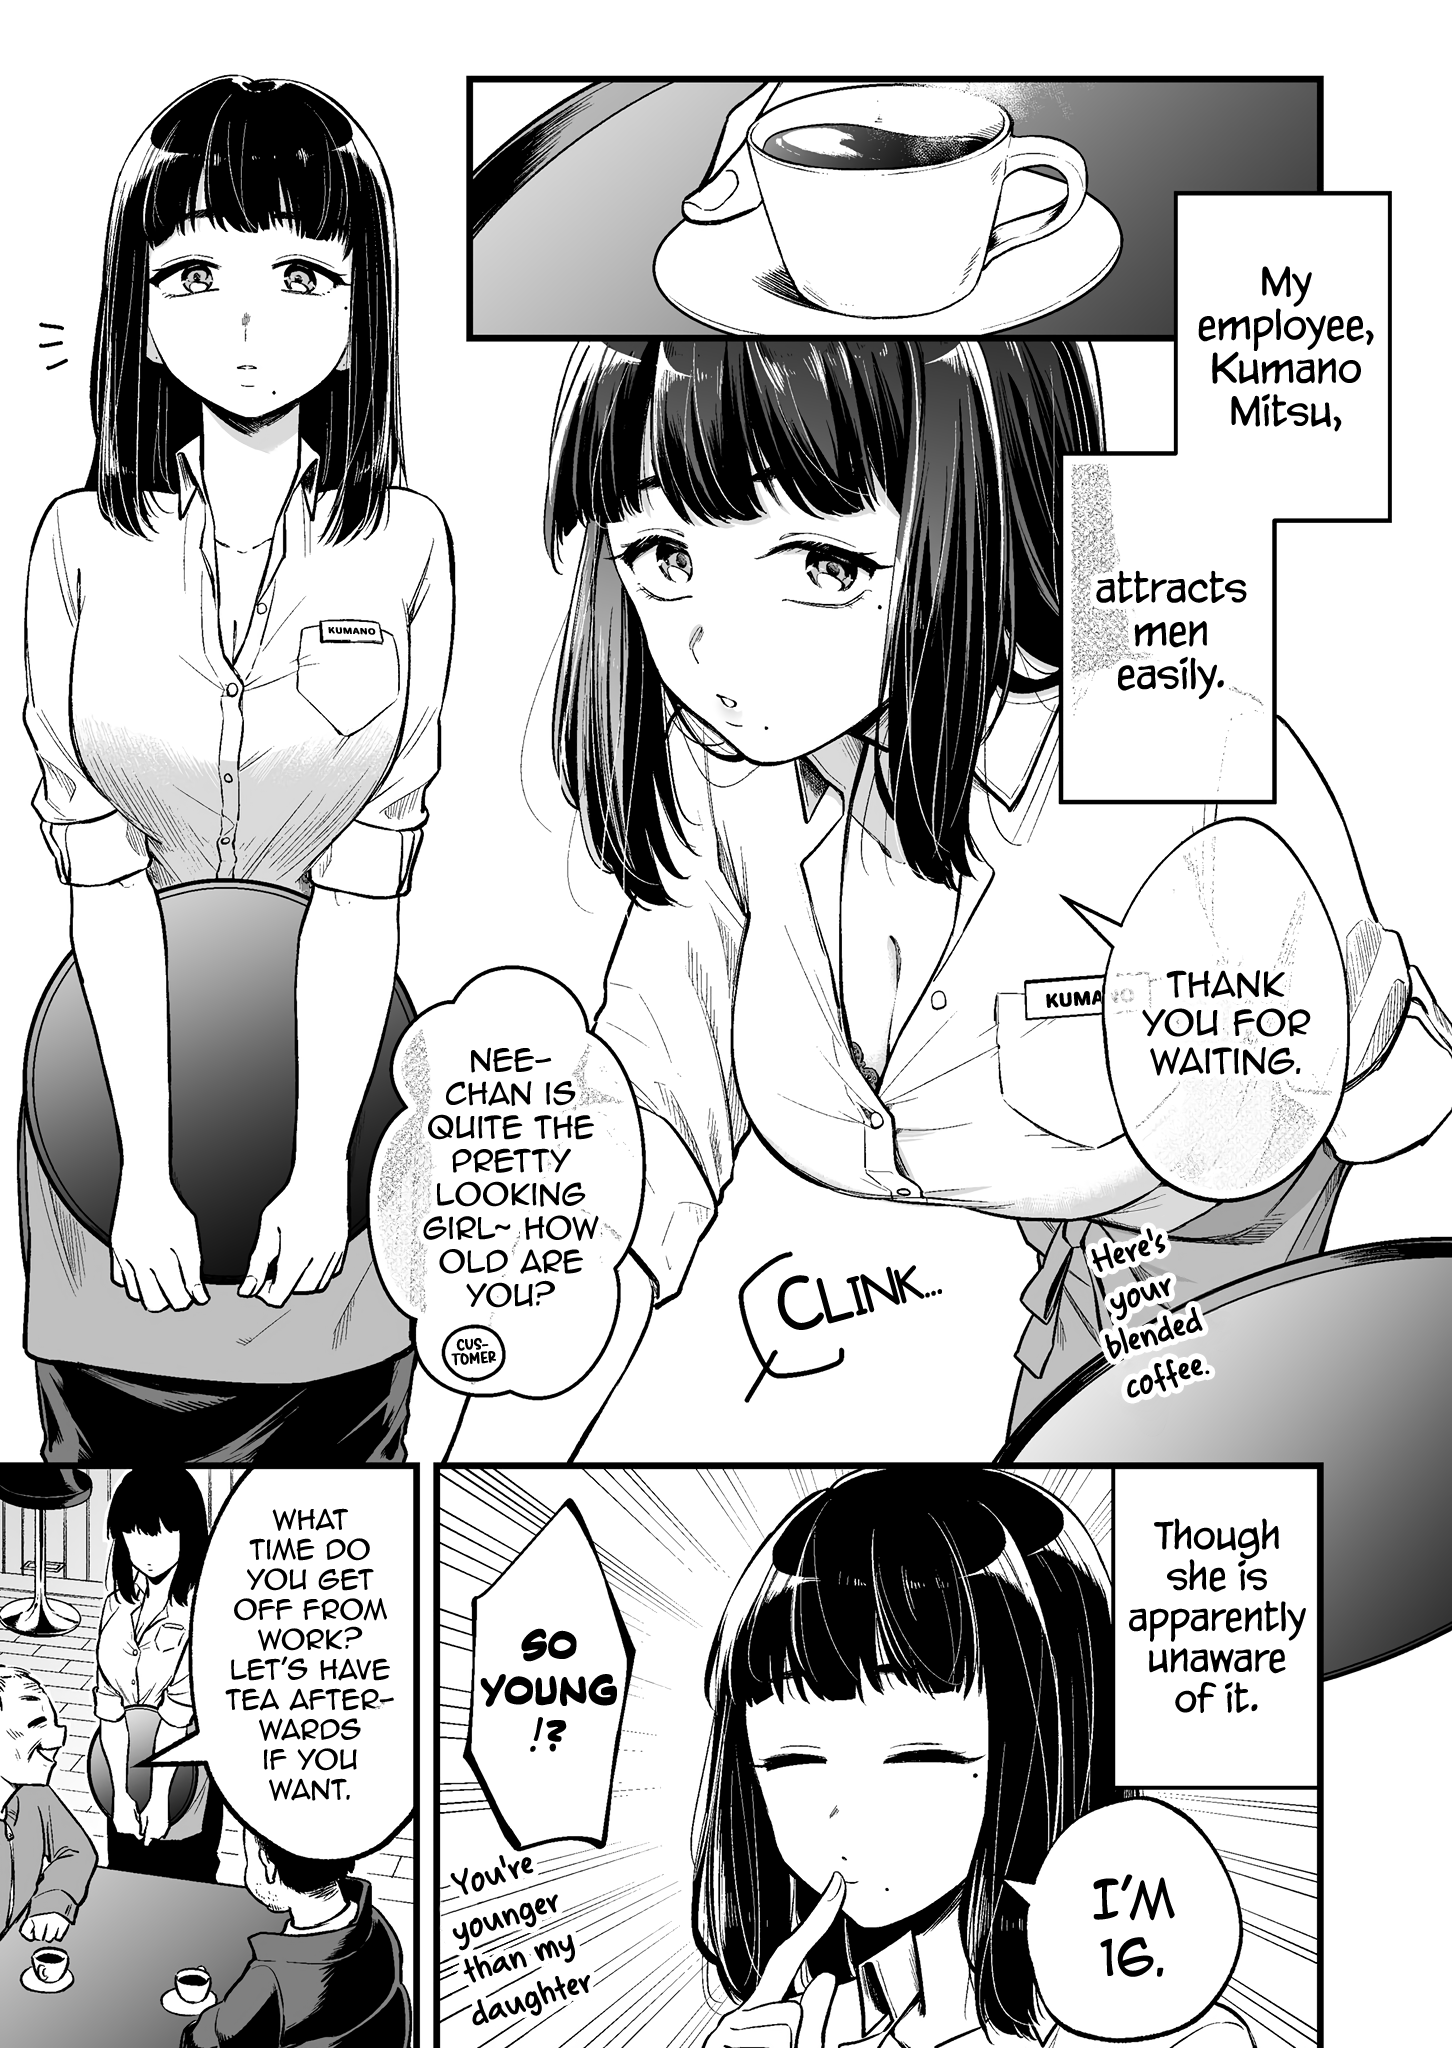 The Manager And The Oblivious Waitress Chapter 1: The Girl Is Oblivious To Her Surroundings - Picture 2